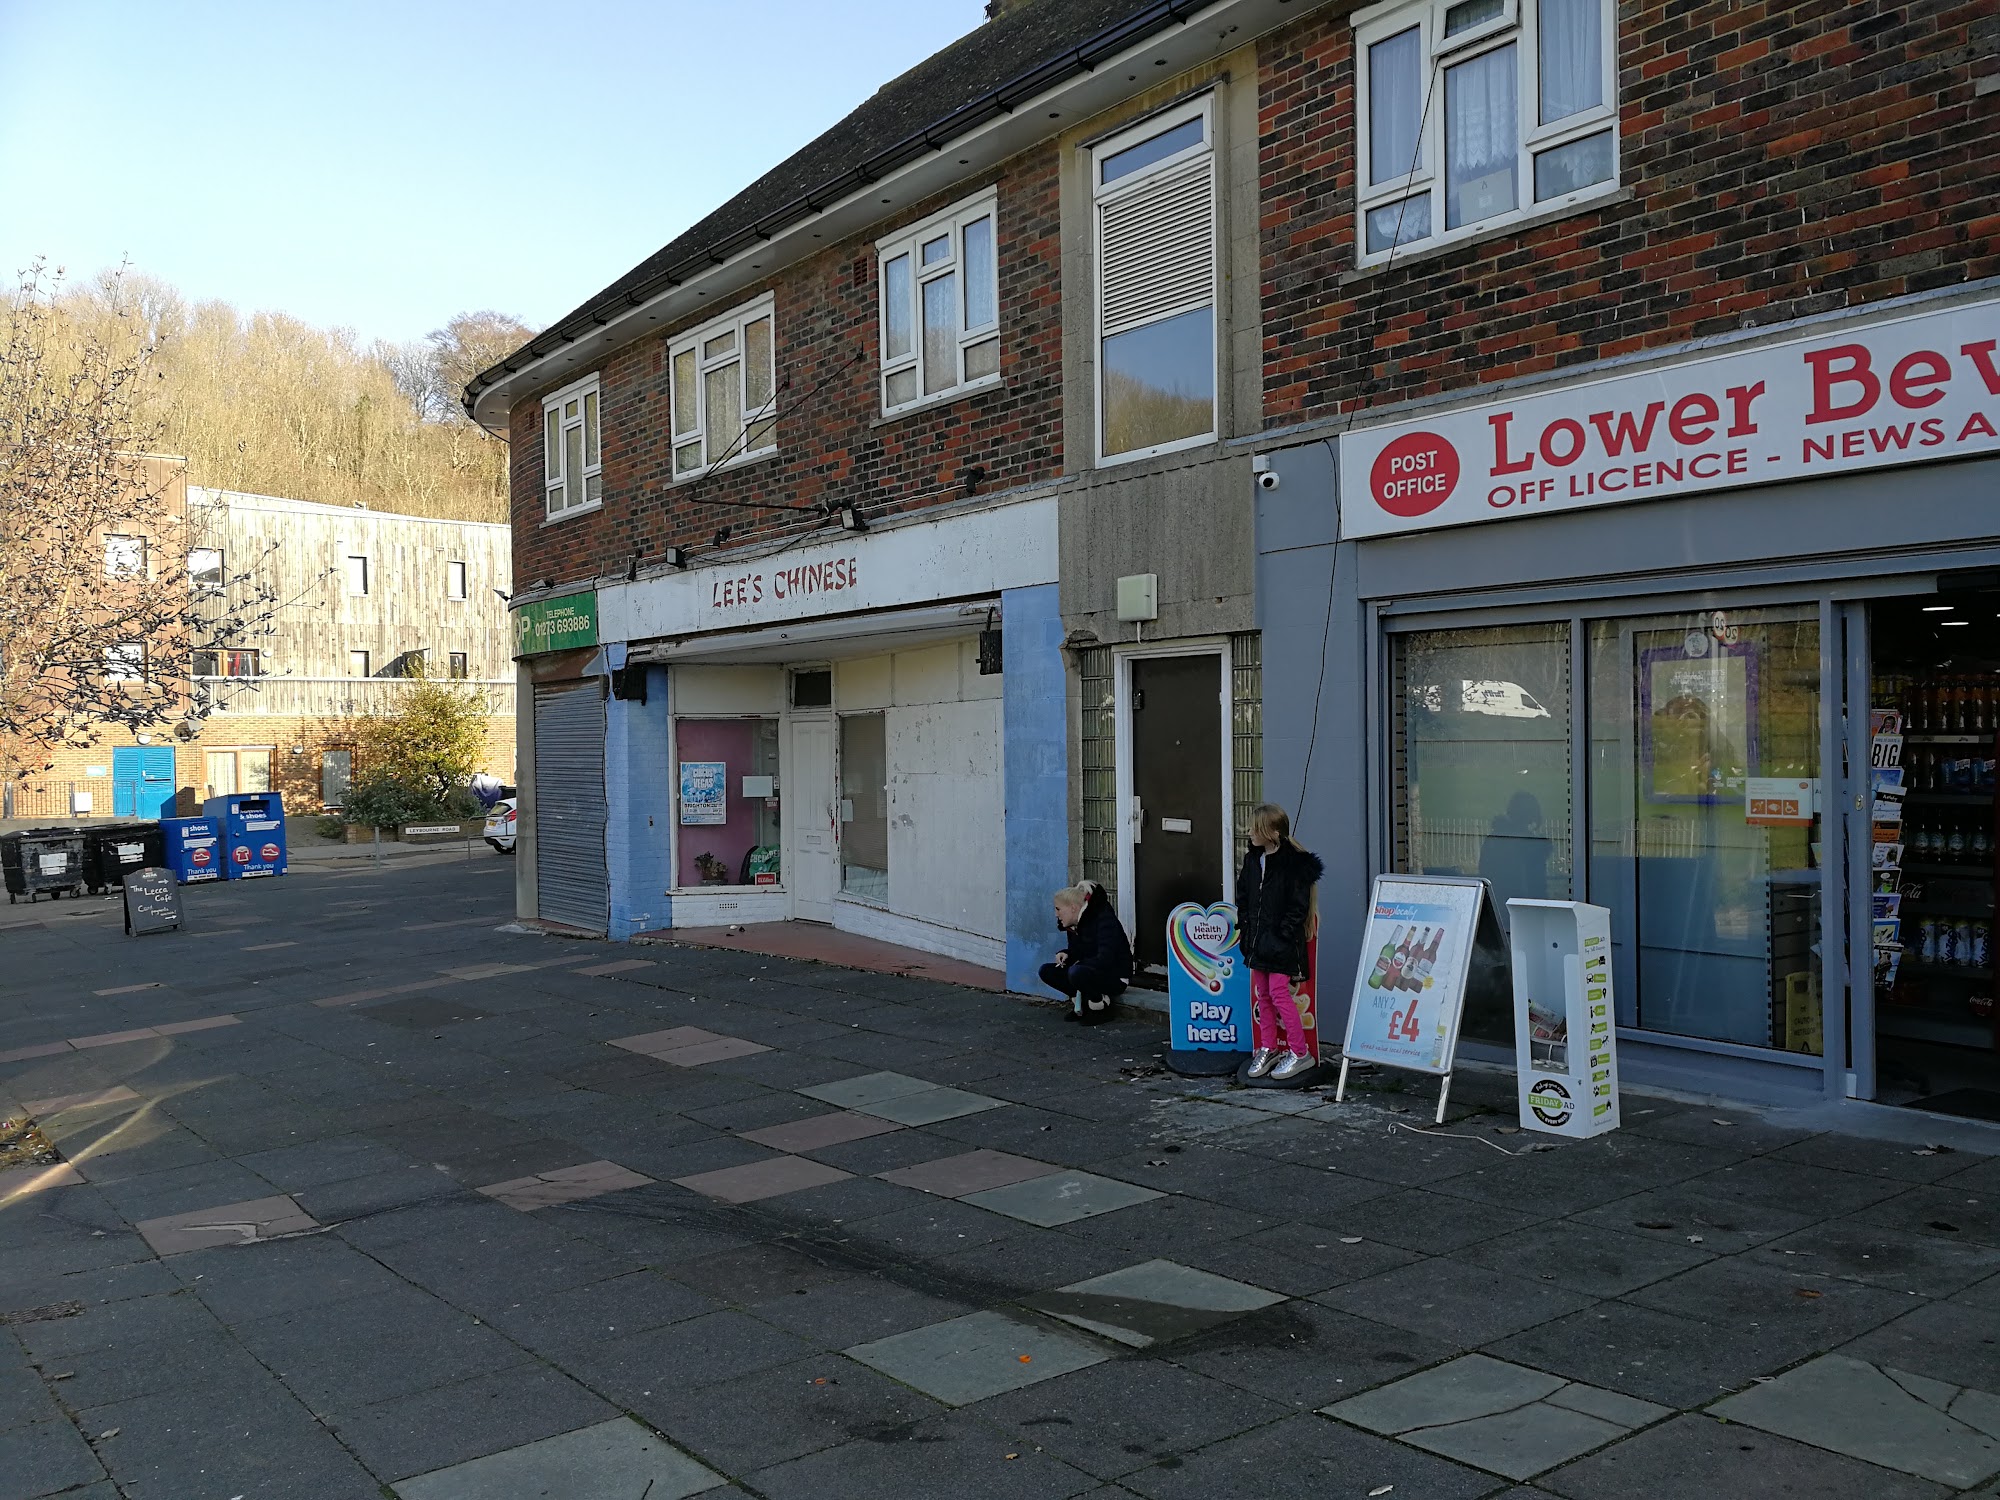 Lower Bevendean Sub Post Office